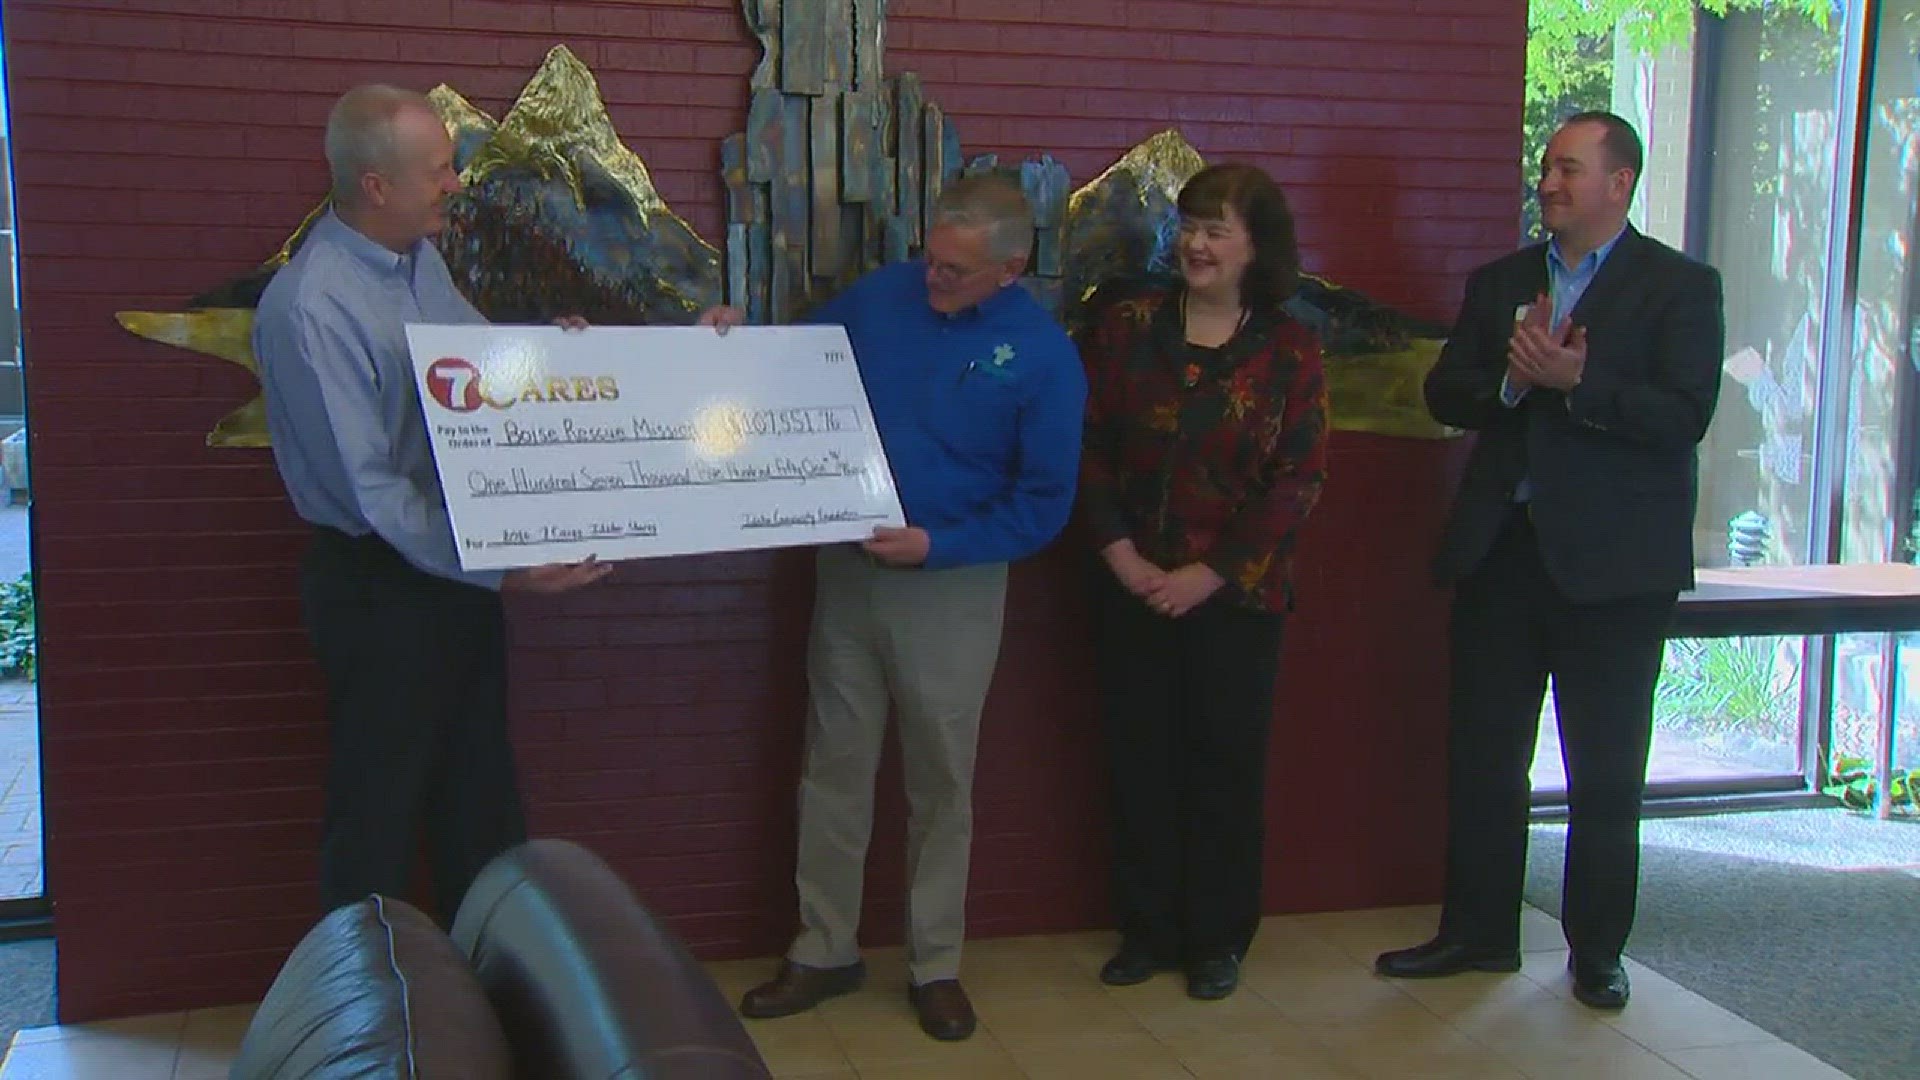 Several checks were doled out to local charities.